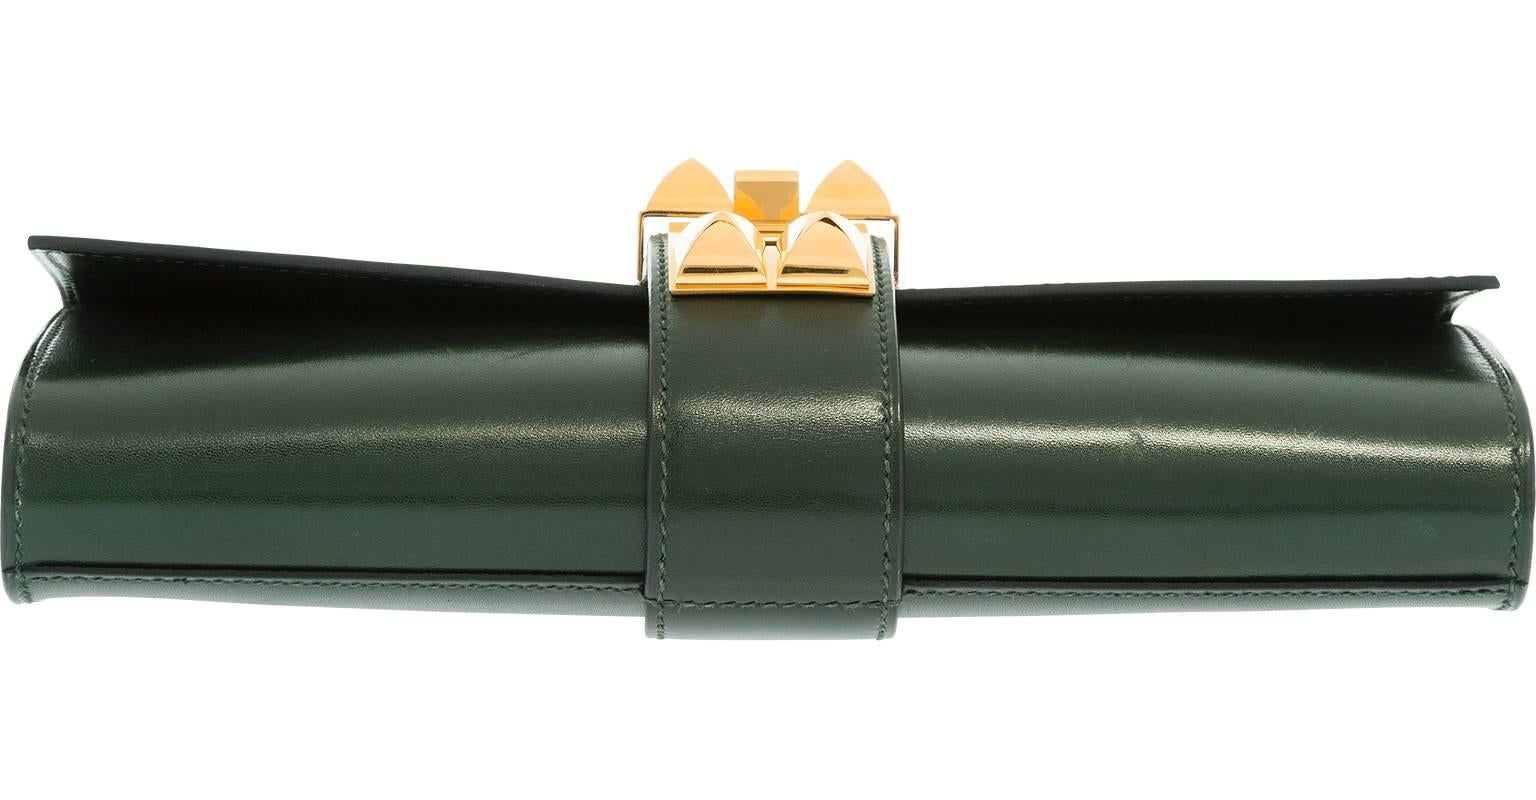 Hermes 23cm Vert Fonce Calf Box Leather Medor Clutch Bag with Gold Hardware In Good Condition For Sale In New York, NY